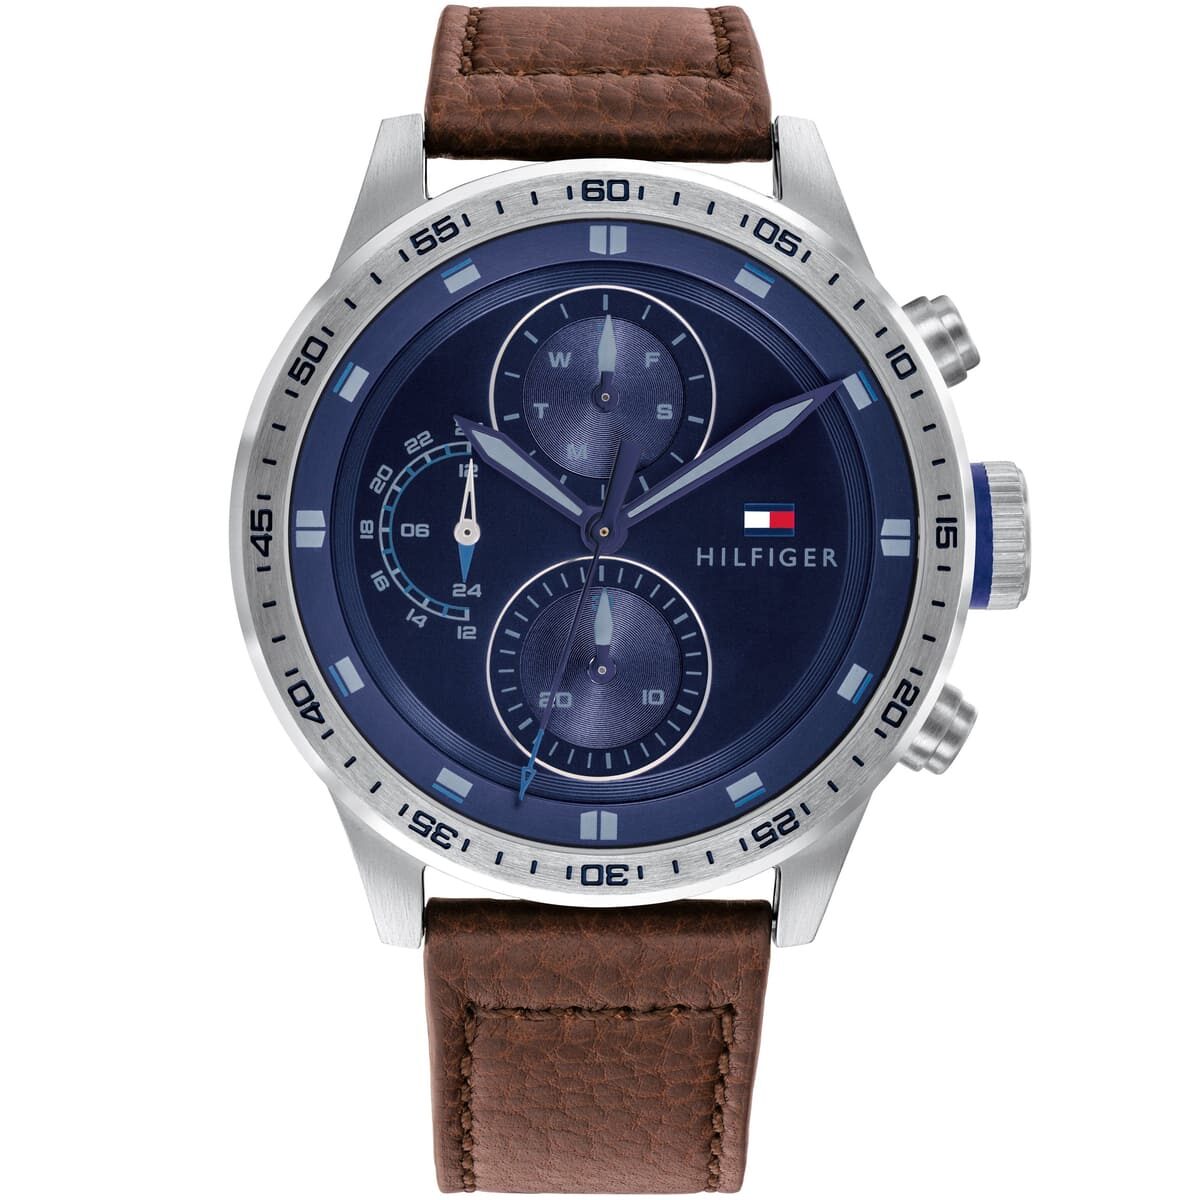 1791807-tommy-hilfiger-watch-men-blue-dial-leather-brown-strap-quartz-analog-day-date-month-trent